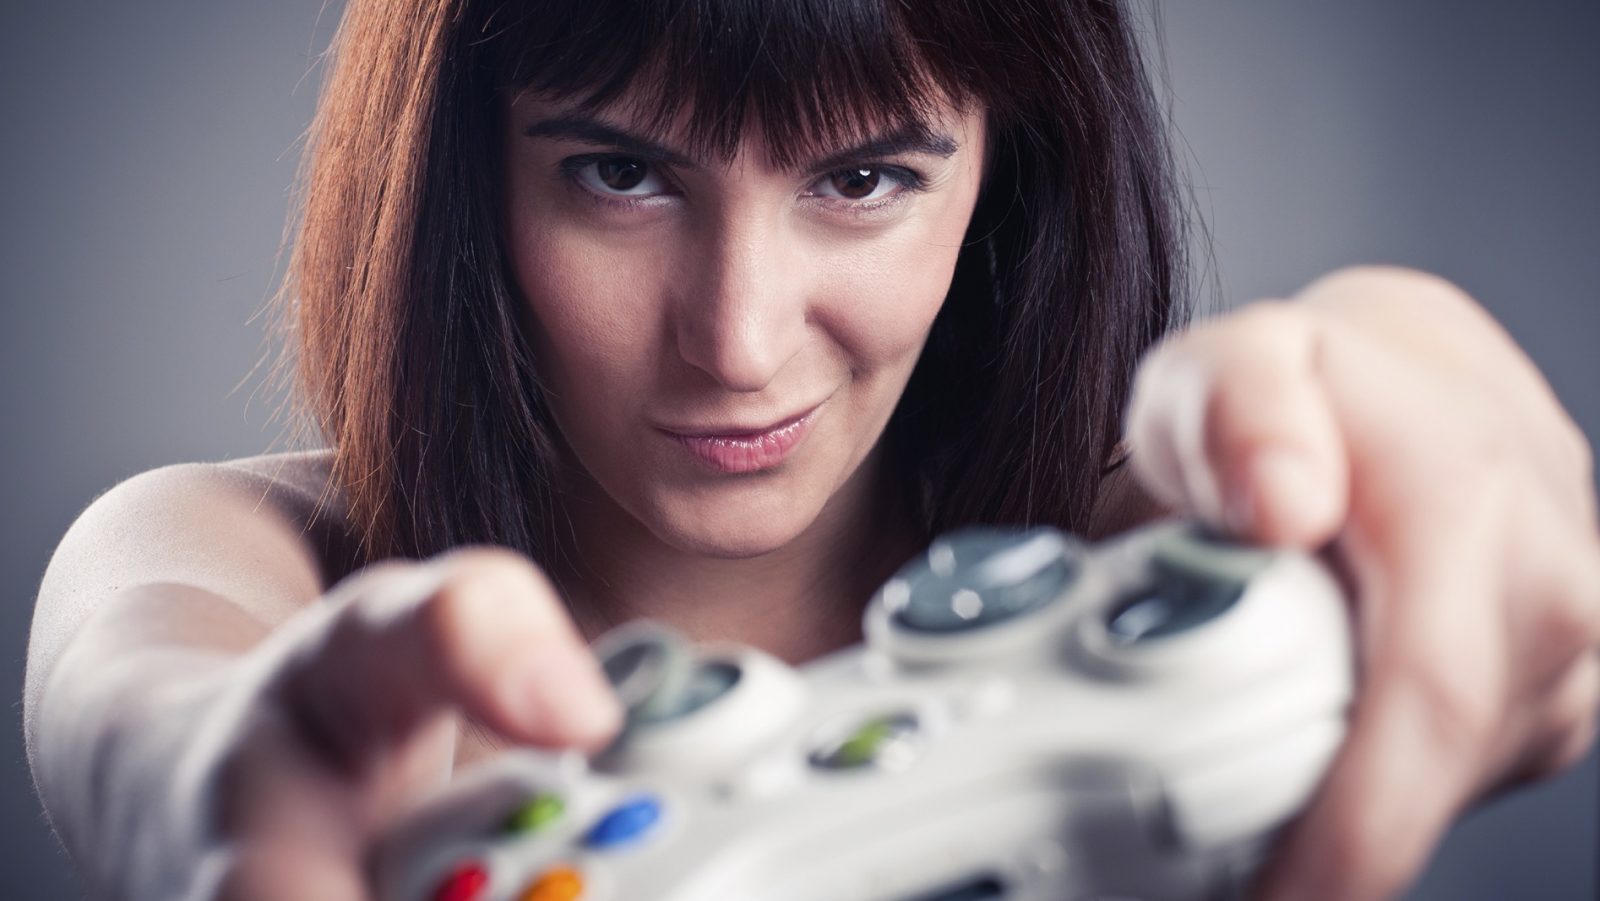 Geek insider, geekinsider, geekinsider. Com,, how wrong are we about the gaming gender divide? , gaming, lady geek